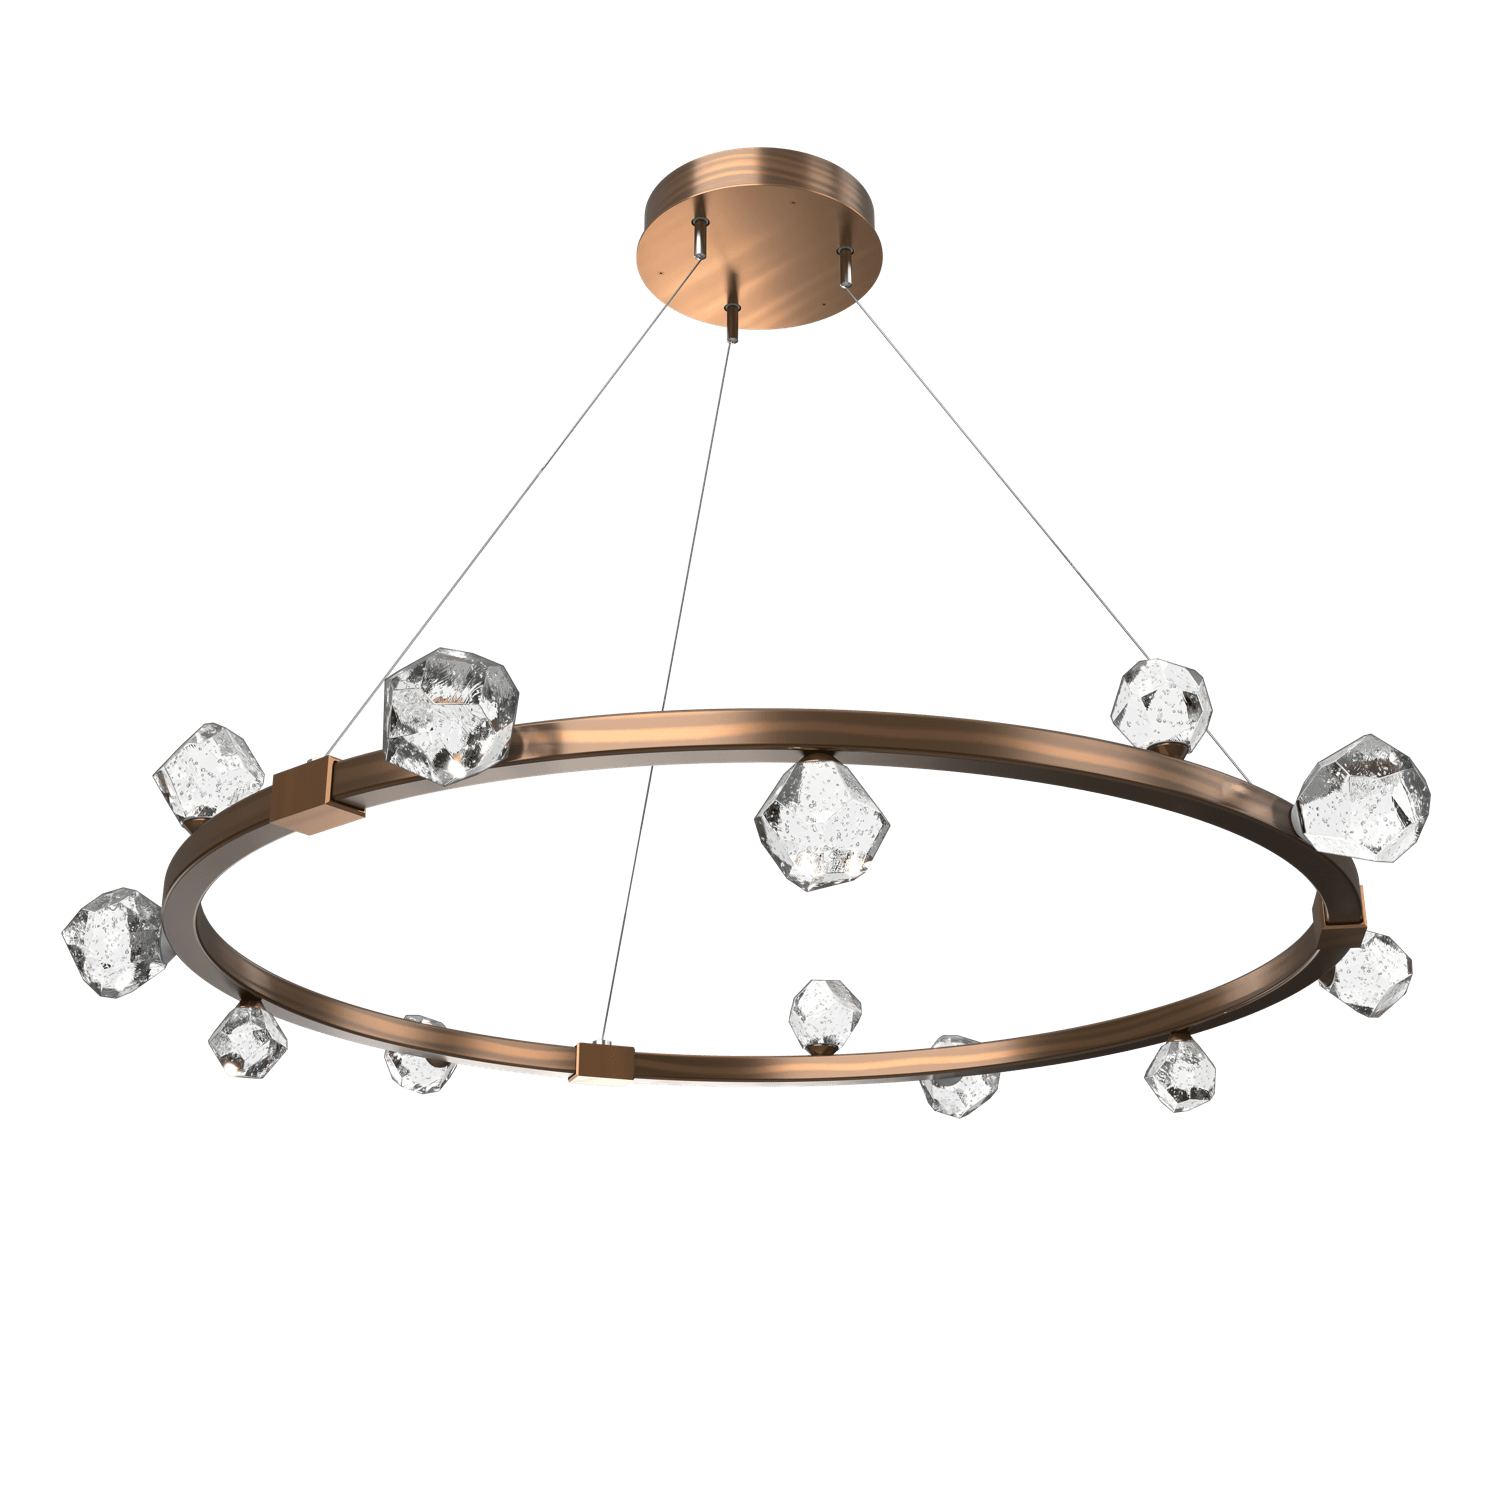 CHB0070-40-RB-Hammerton-Studio-Stella-40-inch-radial-ring-chandelier-with-oil-rubbed-bronze-finish-and-clear-cast-glass-shades-and-LED-lamping